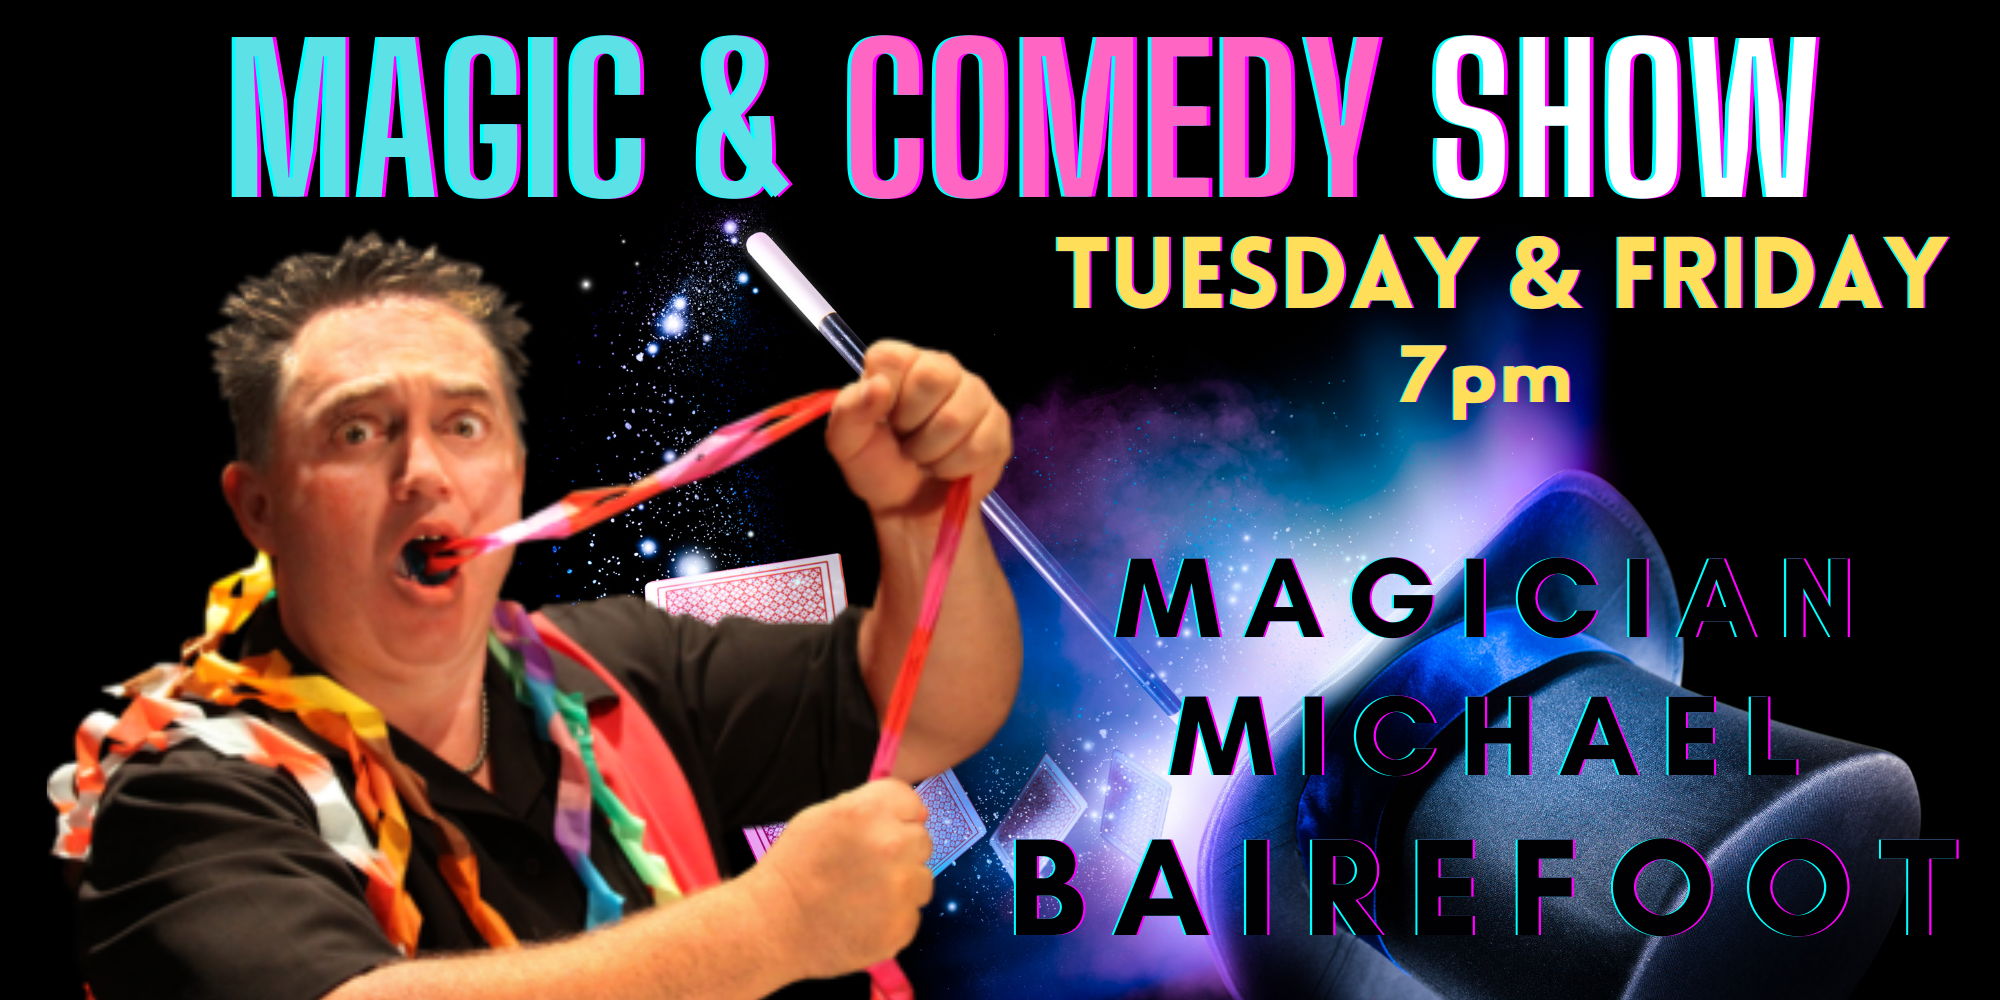 Magic & Comedy Show promotional image